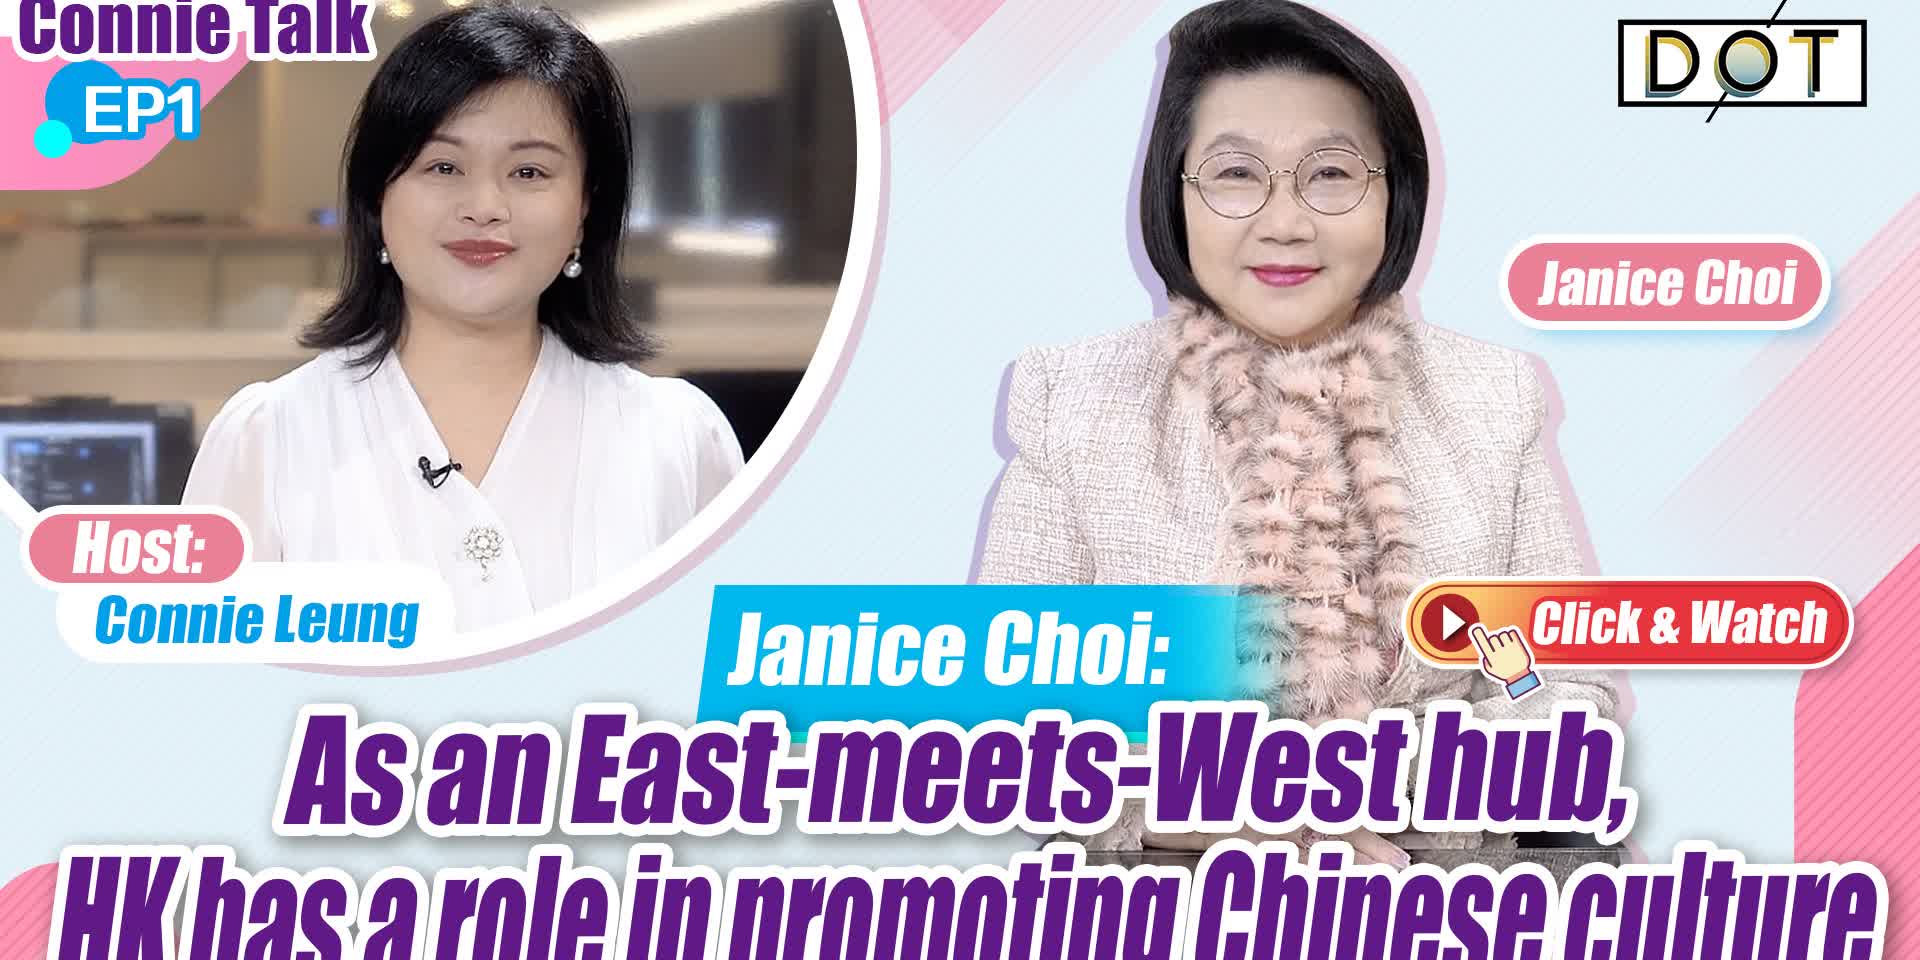 Connie Talk EP1 | Janice Choi: As an East-meets-West hub, HK has a role in promoting Chinese culture